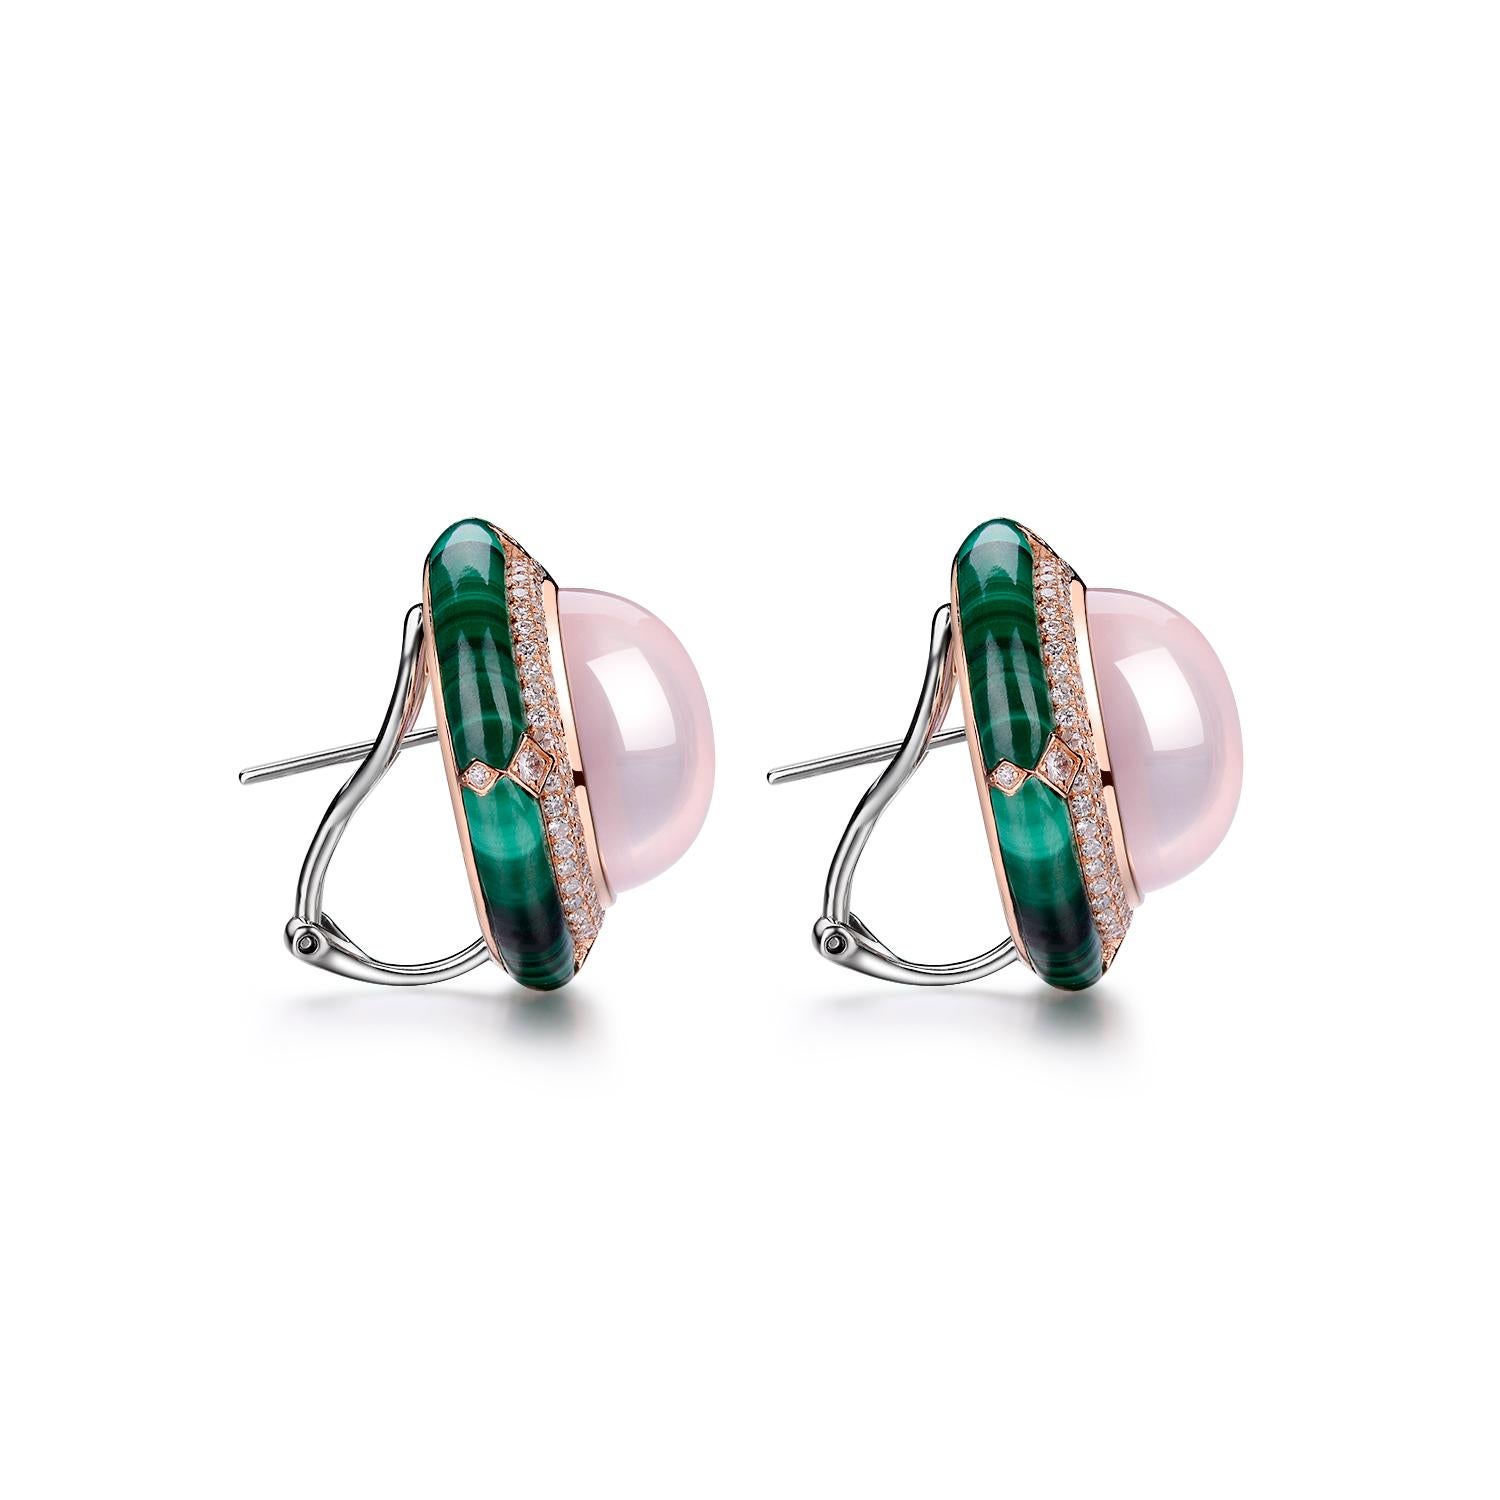 This earrings feature 22.96 carats of rose quartz in the center. Rose quartz set in bezel setting assented with double diamond halo. Malachite are handcrafted by our craftsman that fit perfectly into the gold mounting. 
Matching ring is available,